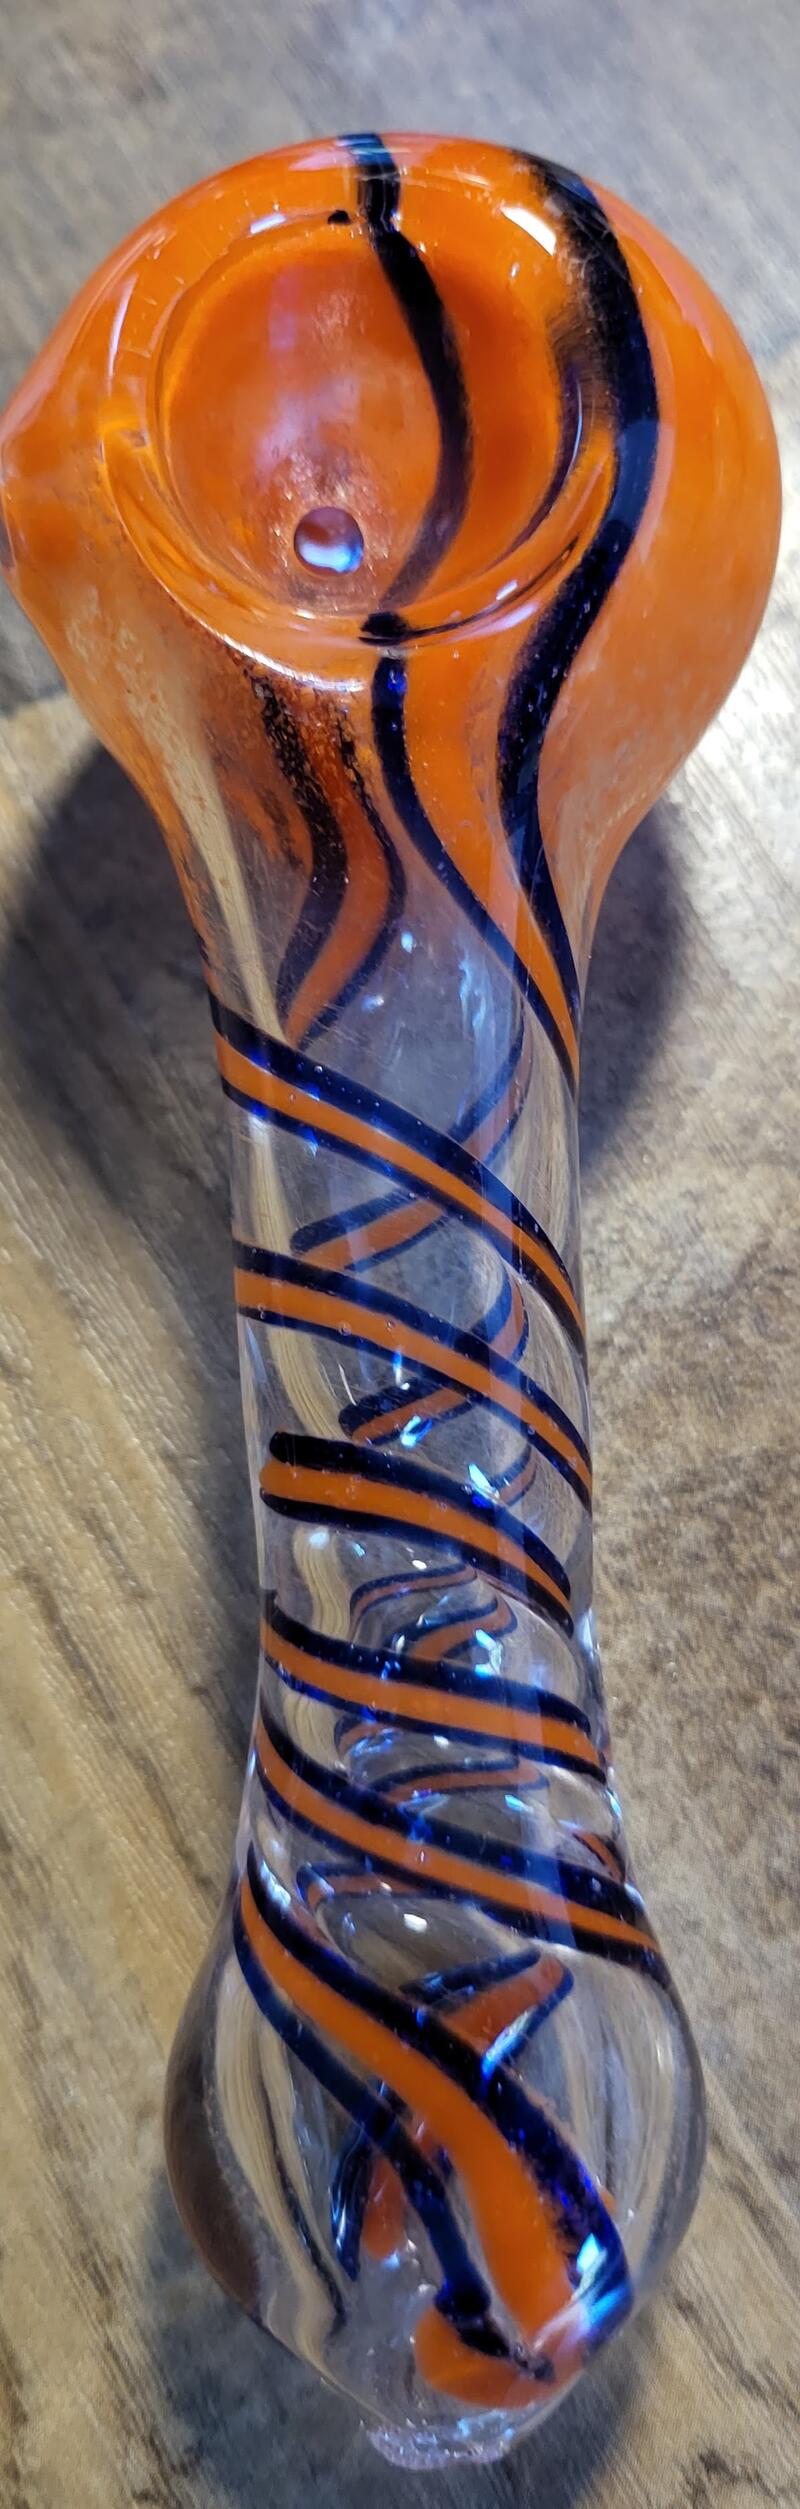 Glass Pipe - 4.5" & 3.5" lengths